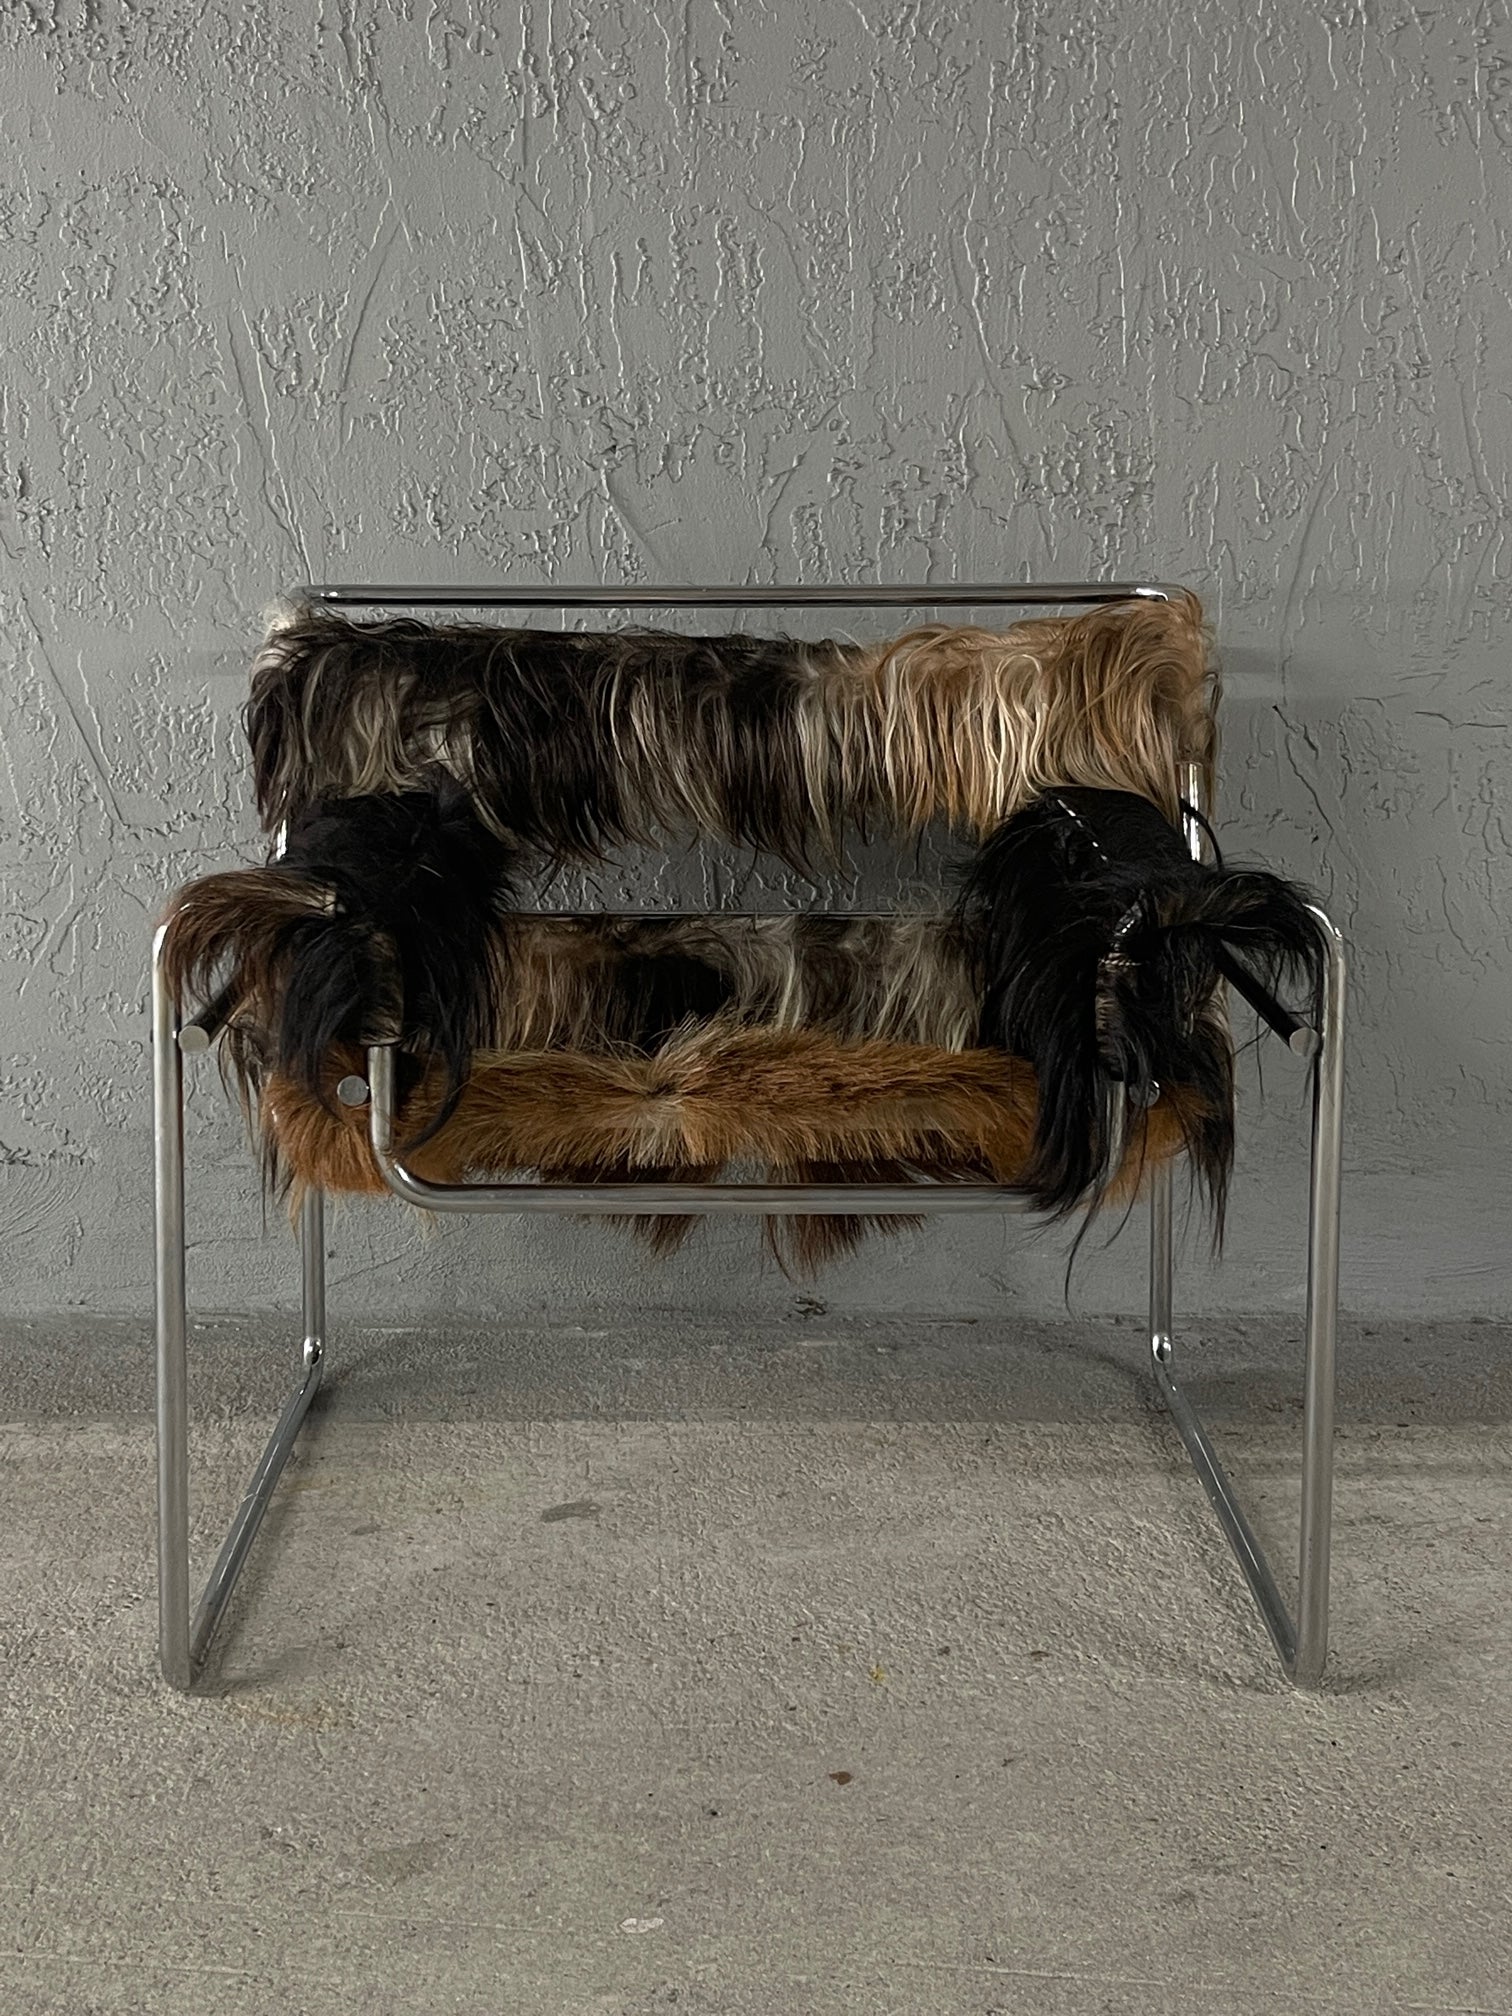 Marcel Breuer 'Wassily' chair, produced before 1968 in Italy by Gavina. Authentic and stamped. The chairs body has a completely original frame and was restored in a beautiful thick coat of New Zealand Exotic Goat Skin to add a luxurious one of a